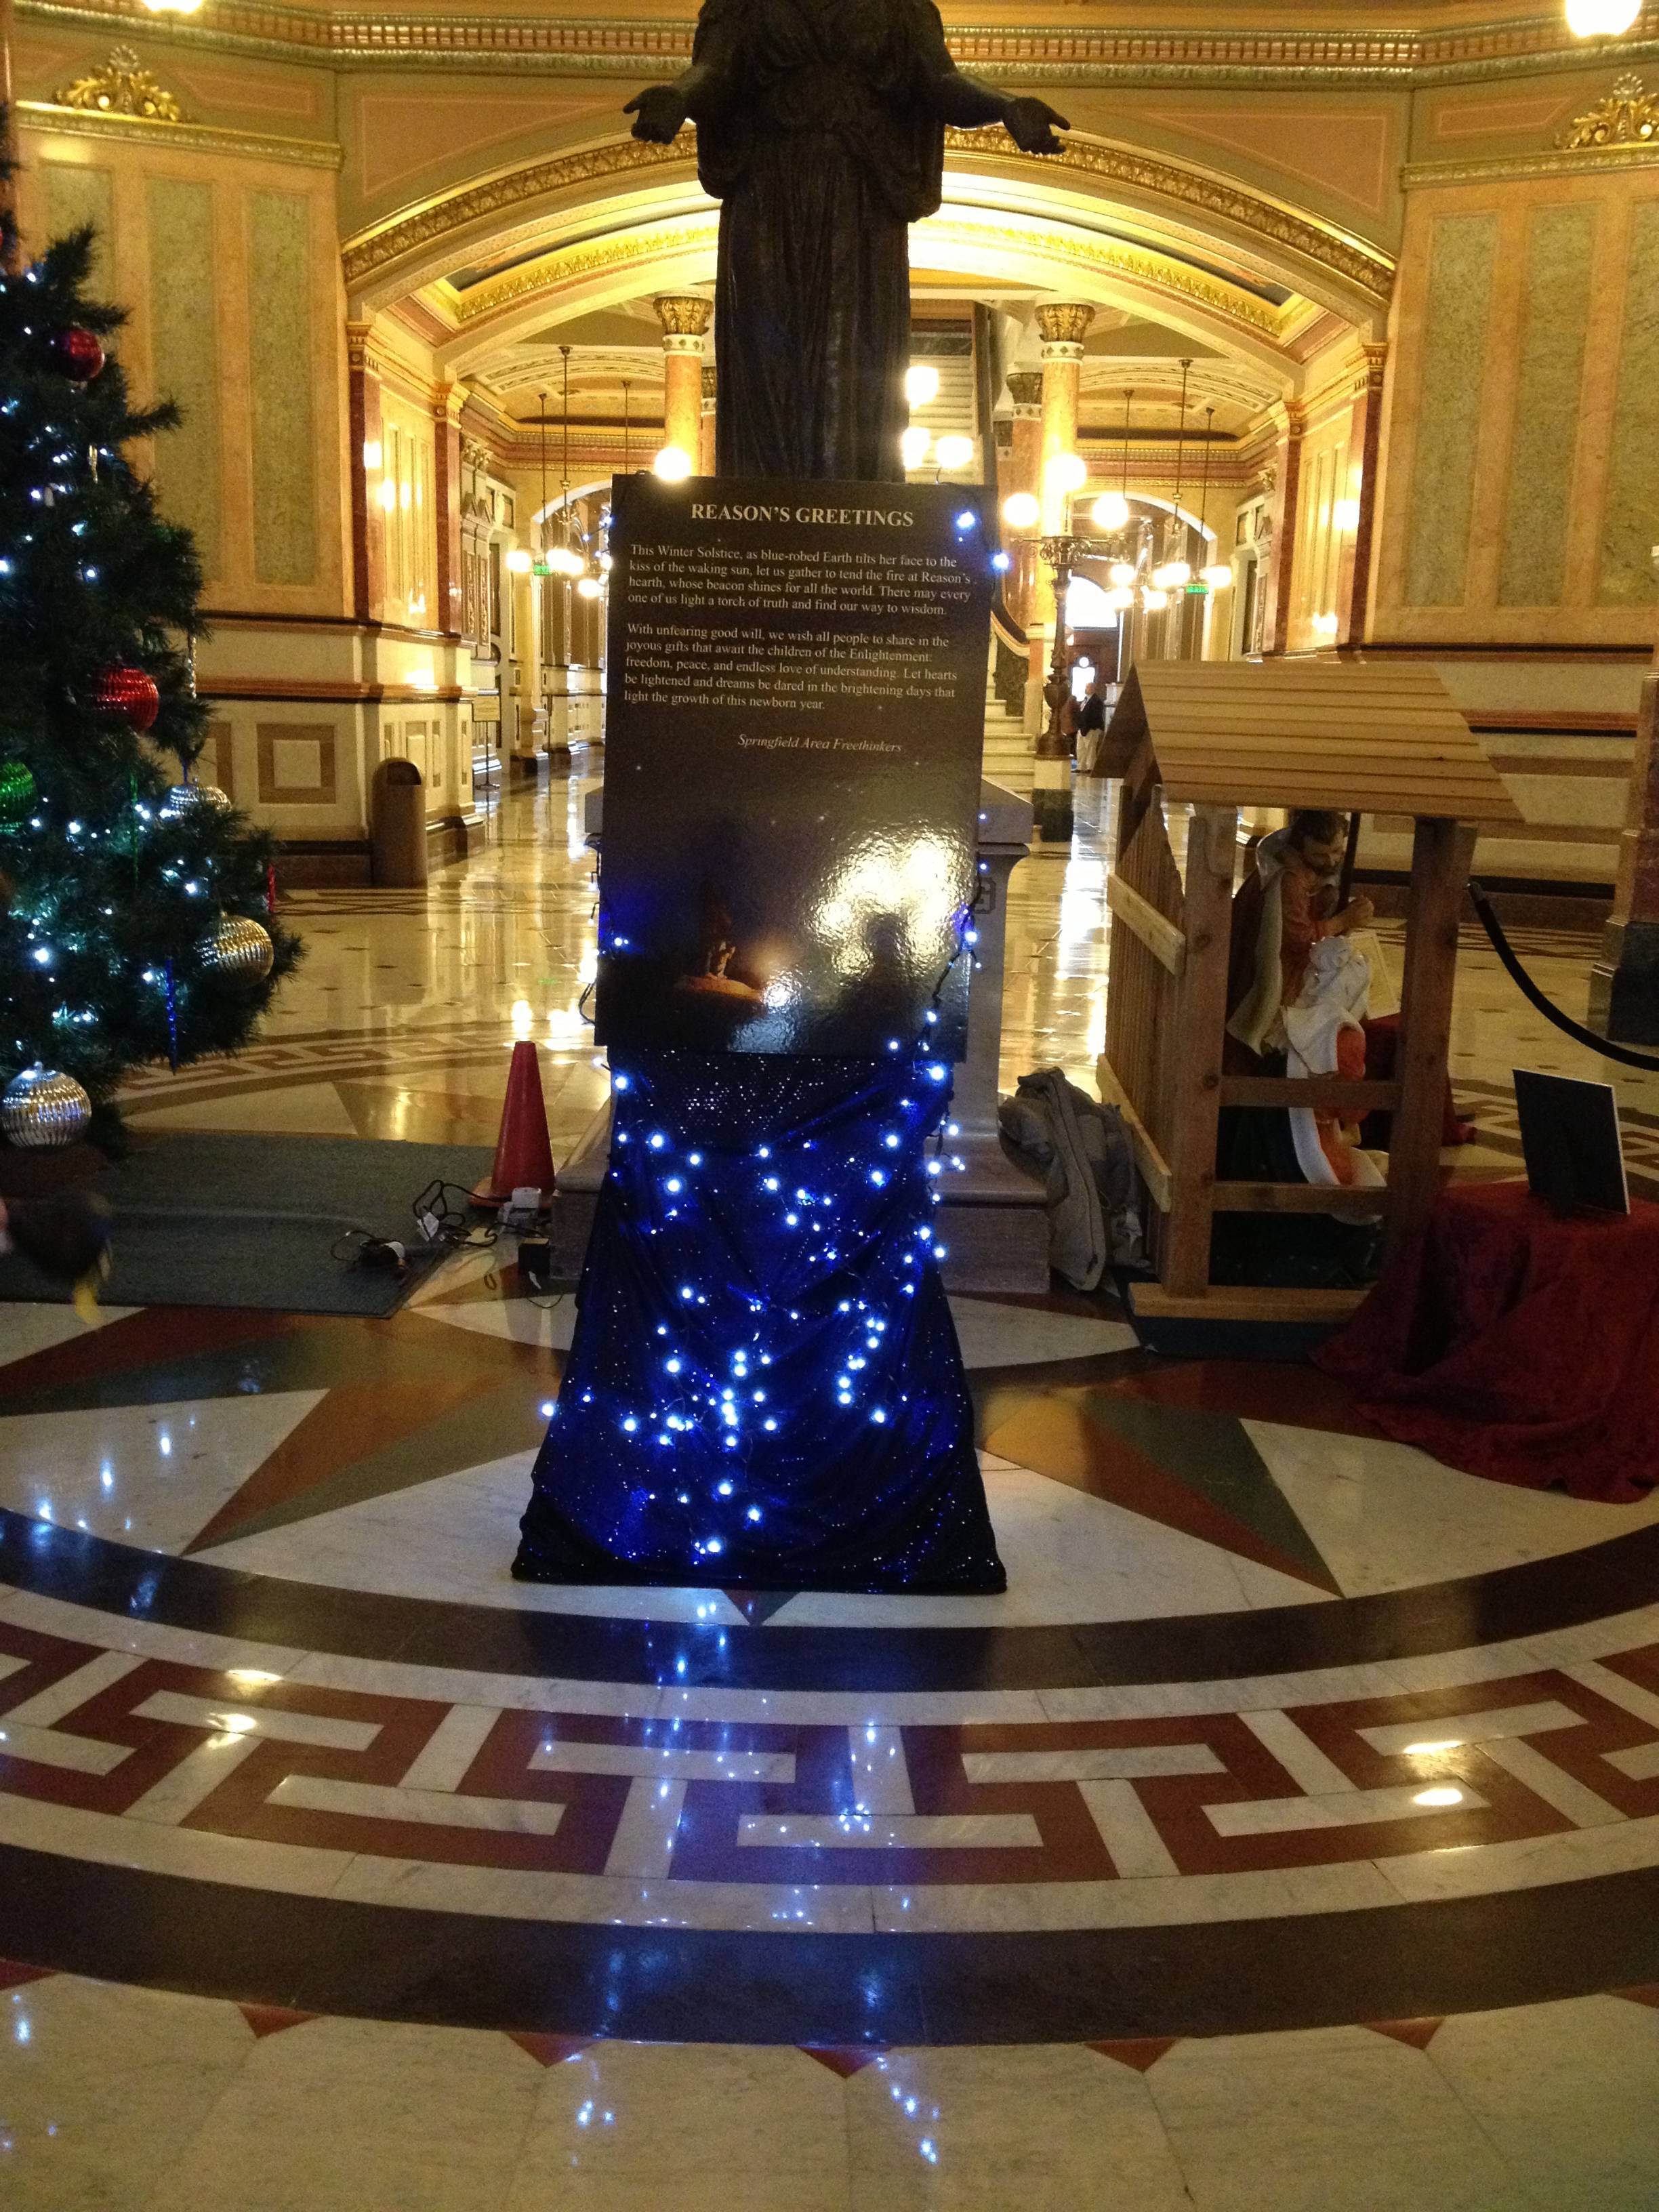 The Illinois State Capitol Rotunda is Now Home to a Very Optimistic Atheist Display